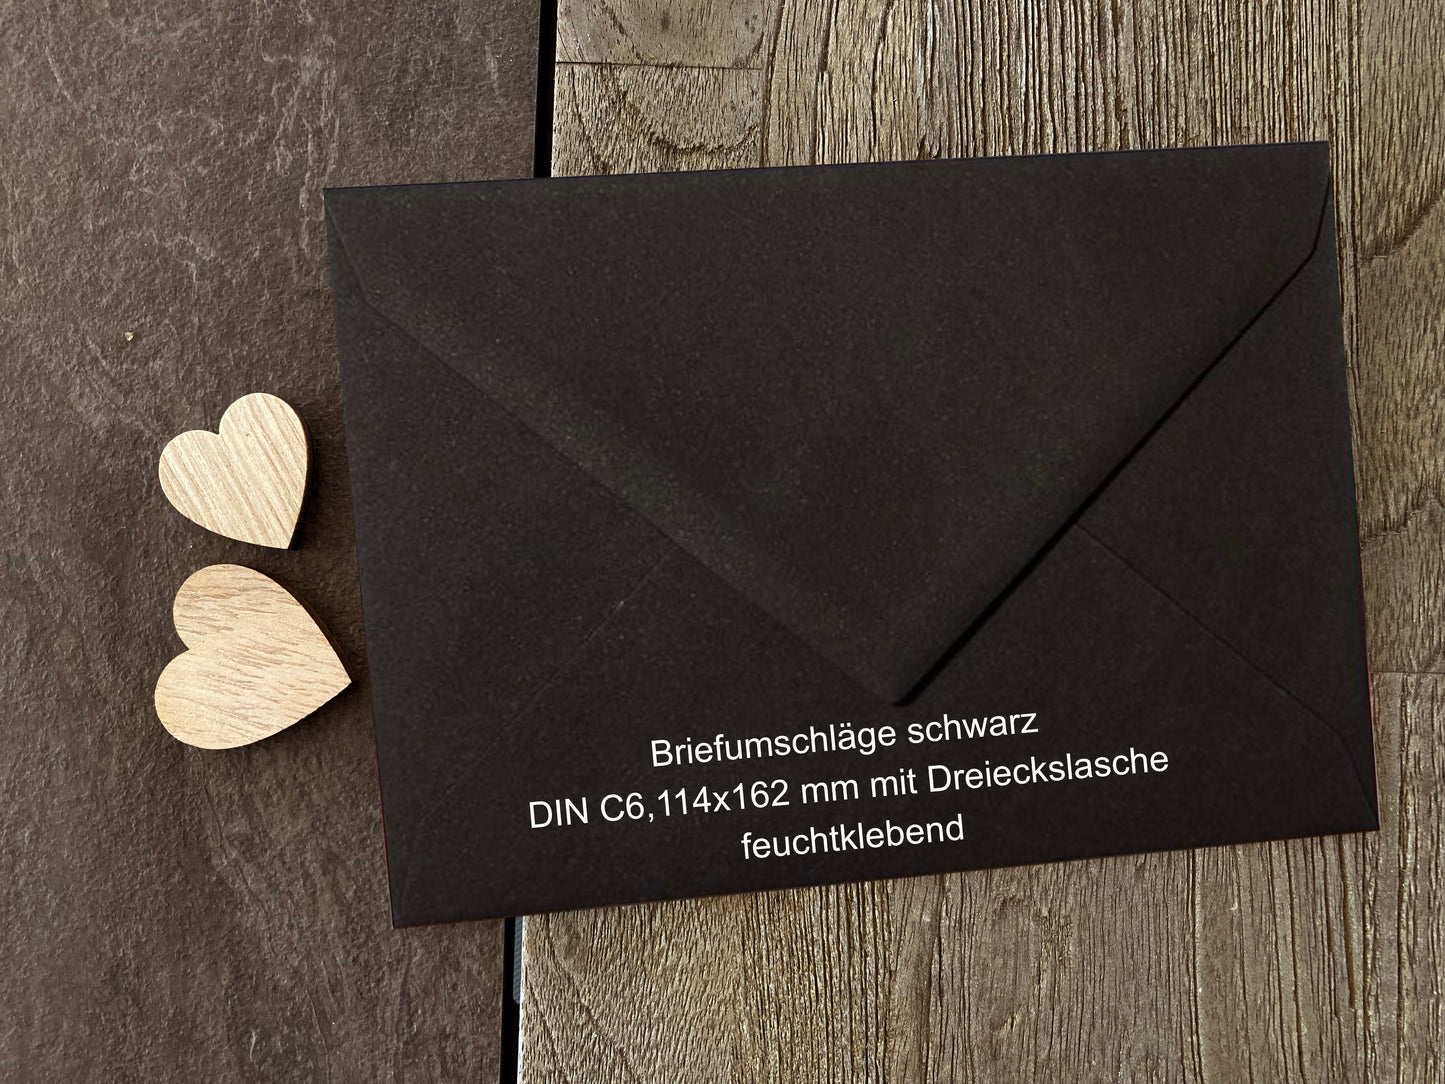 a black envelope with a wooden heart on it